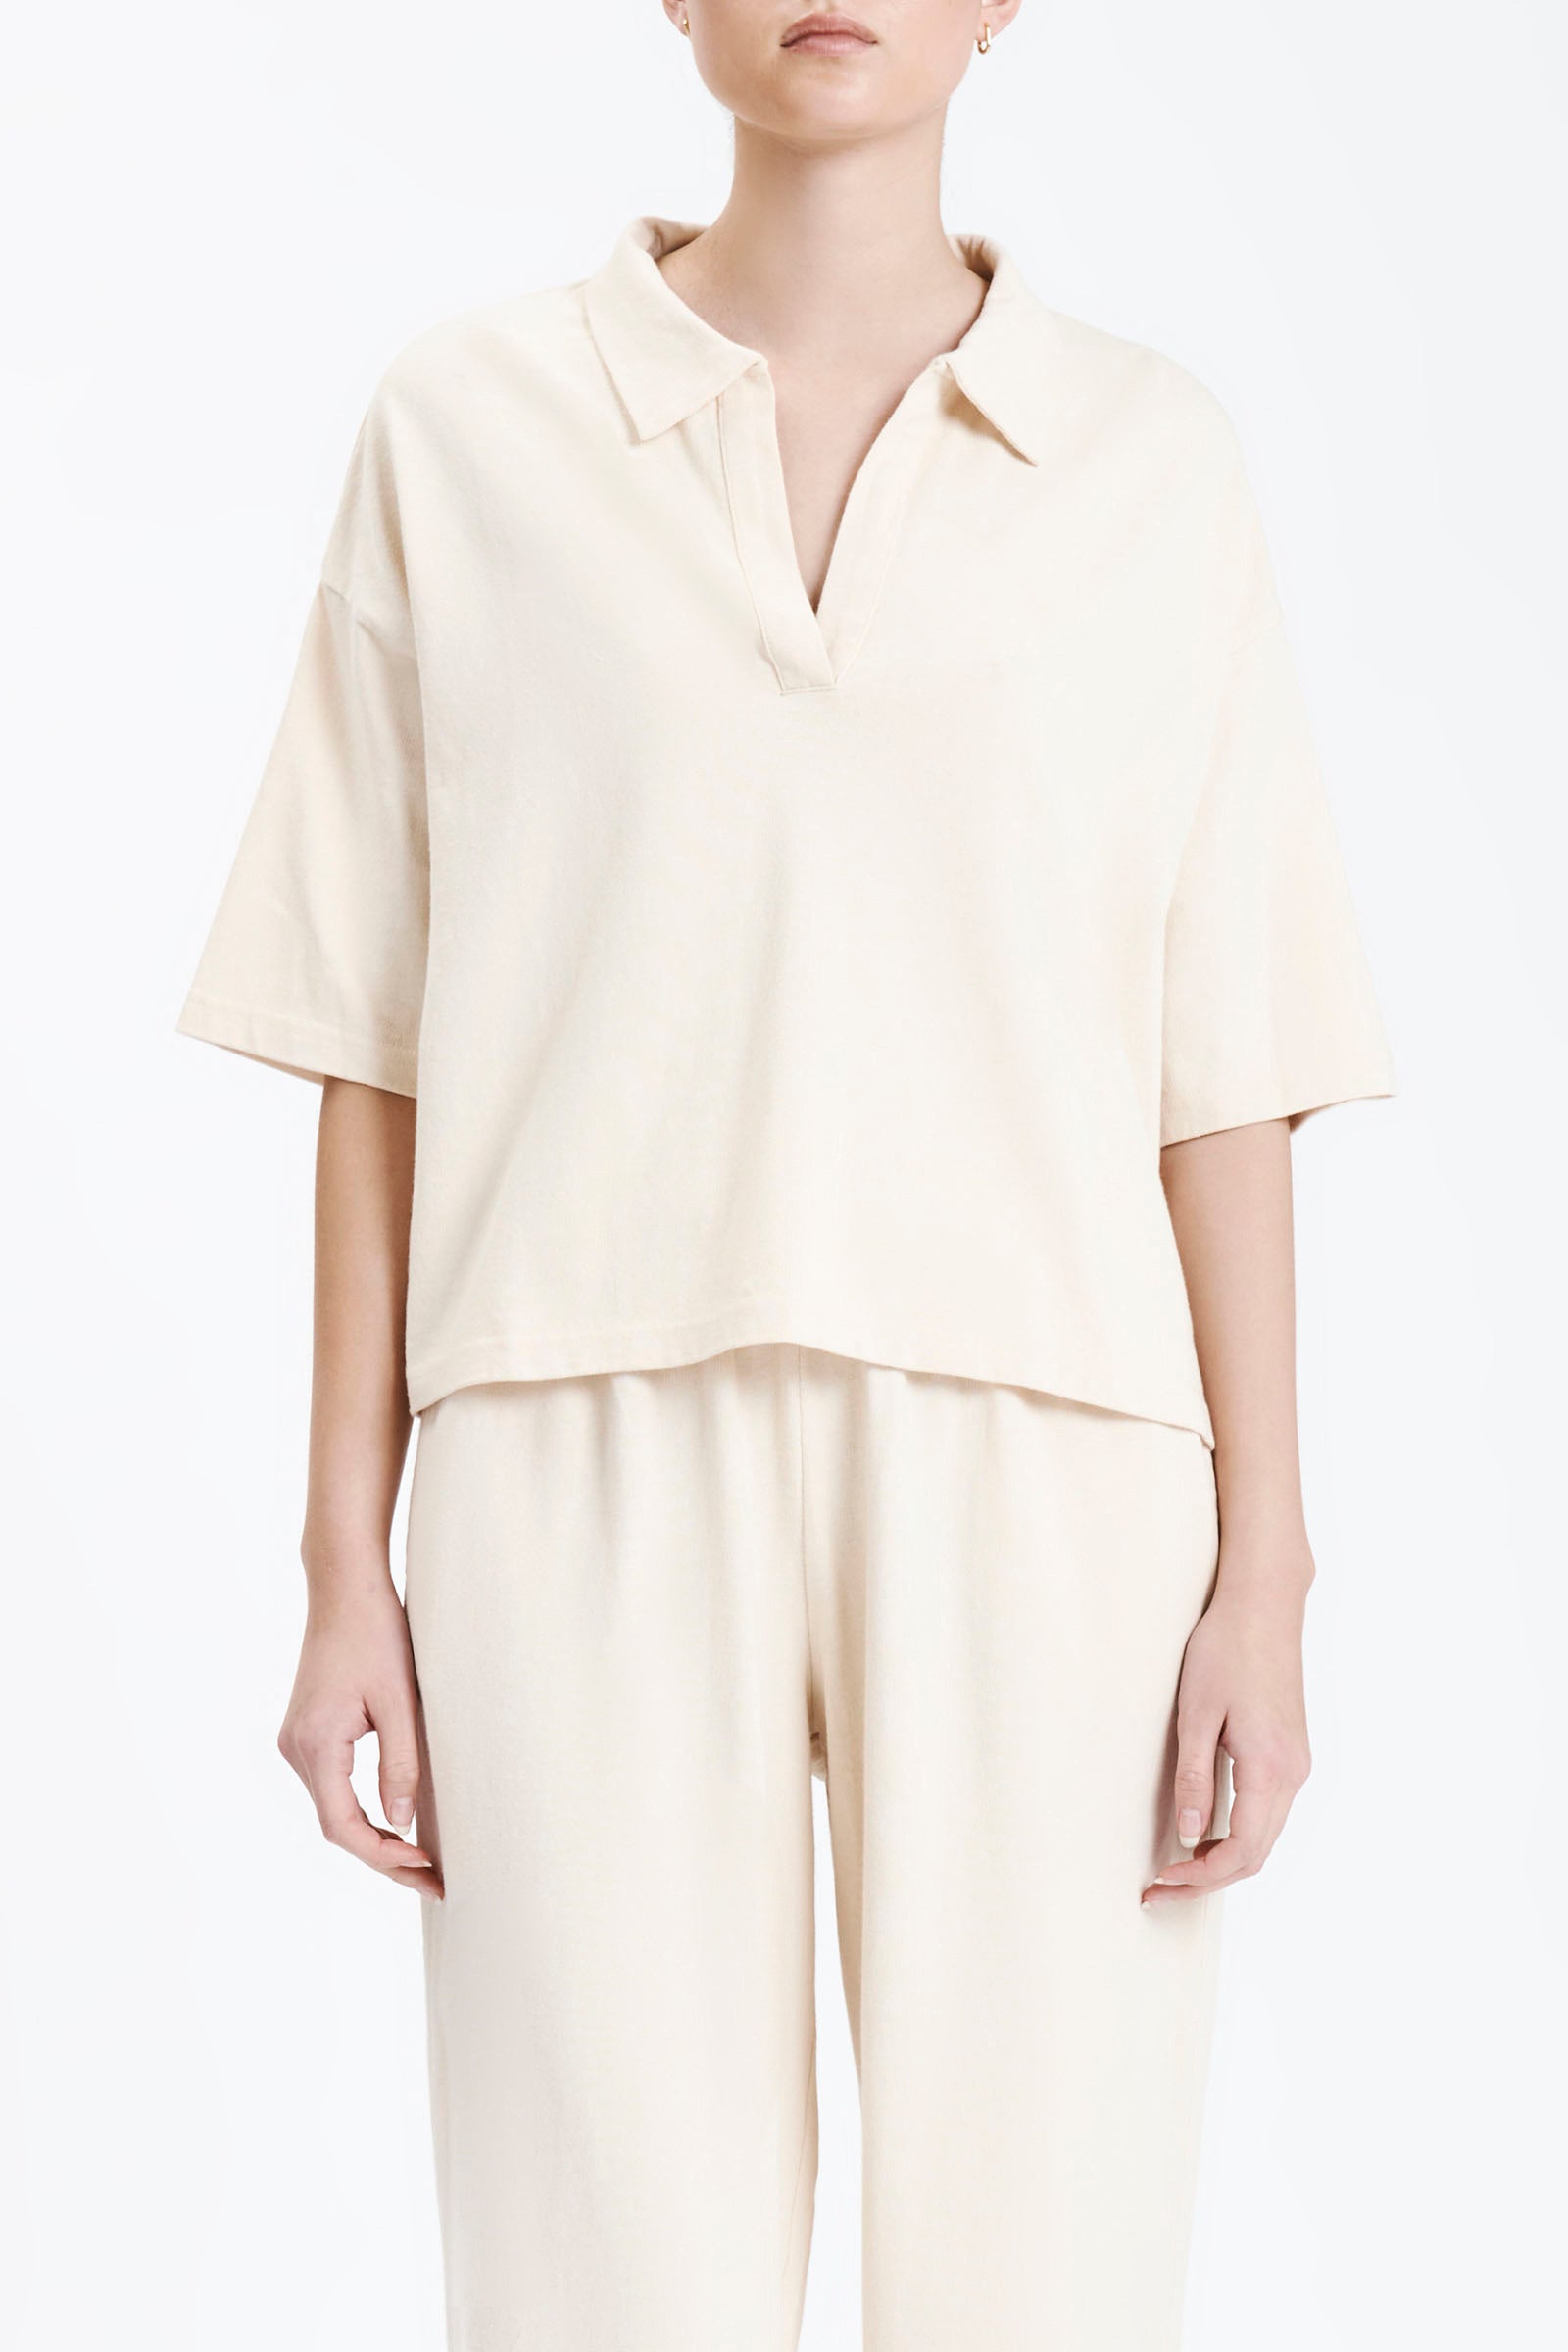 Nude Lucy Fresno Rugby Top In a Light Yellow & Beige Crema Colour